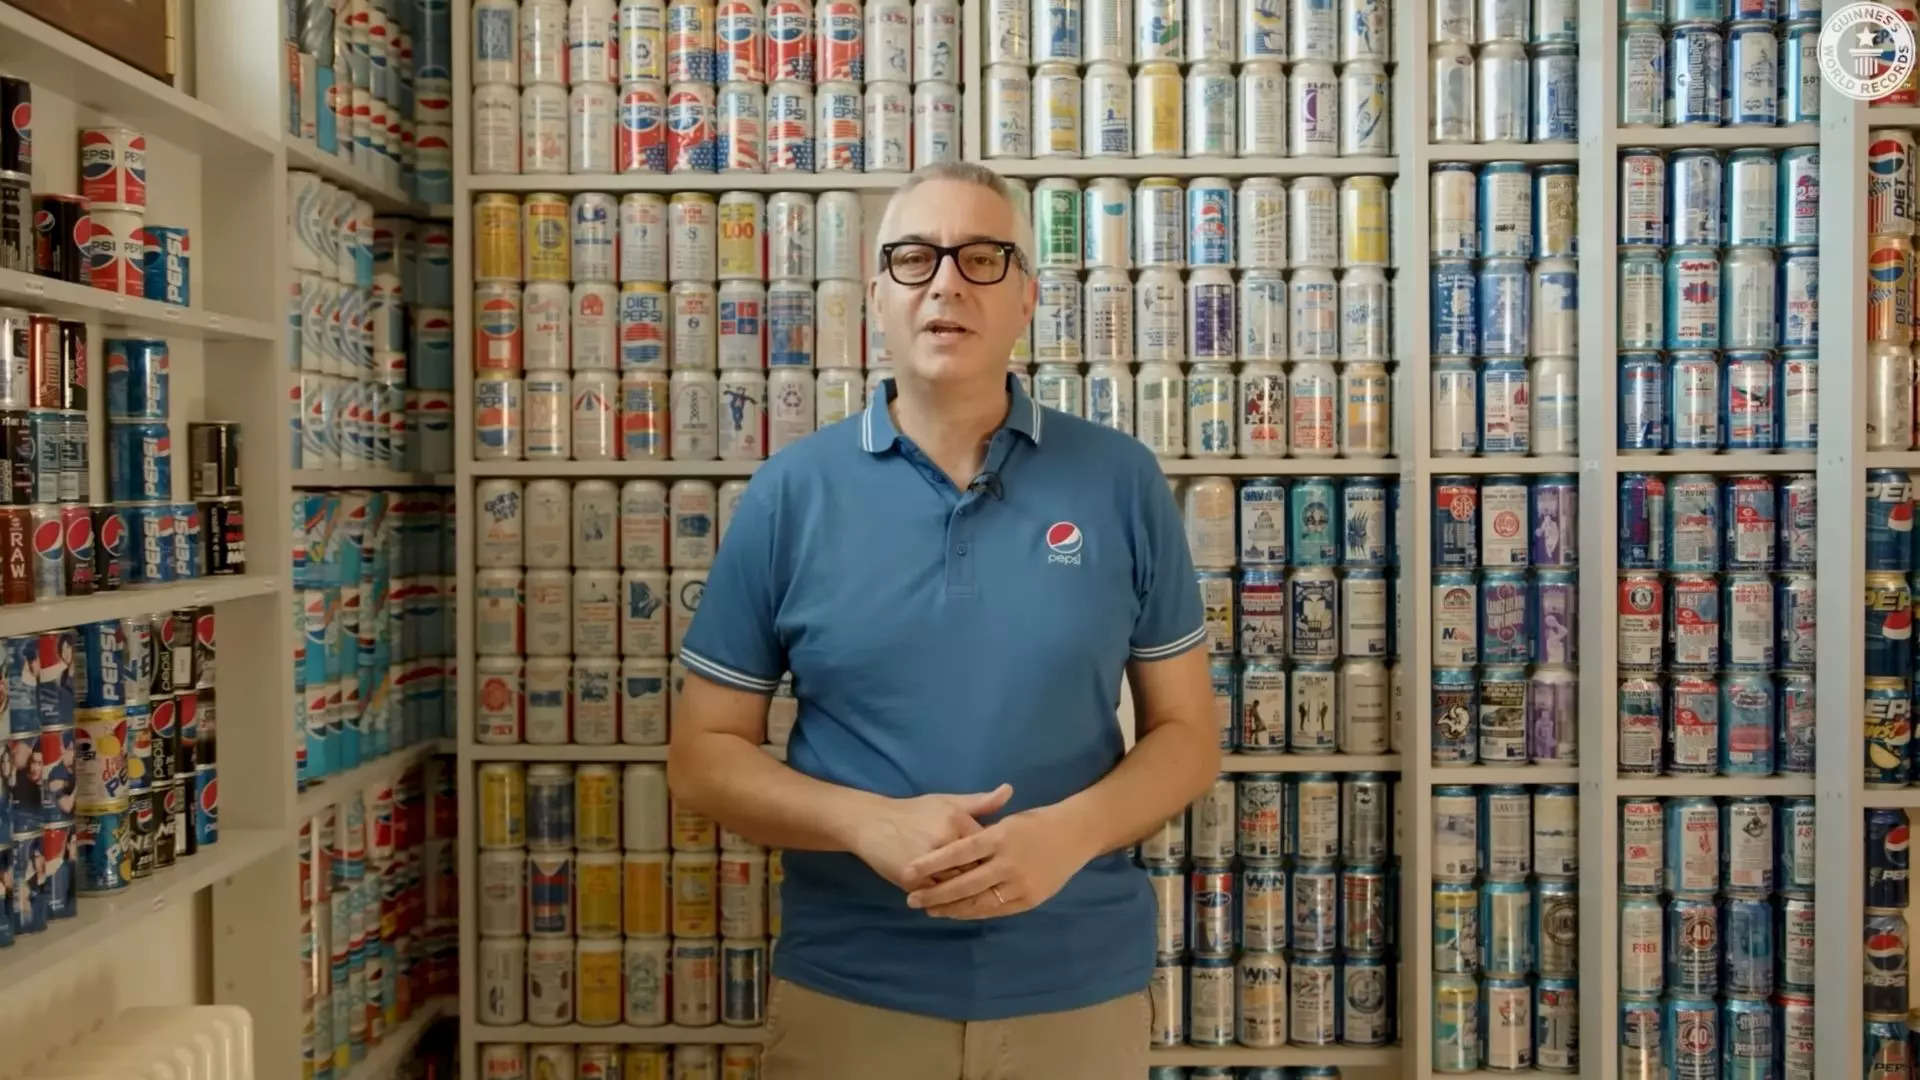 Christian Cavaletti​, pictured with the world's largest collection of Pepsi cans | Image courtesy: Guinness World Records/Youtube